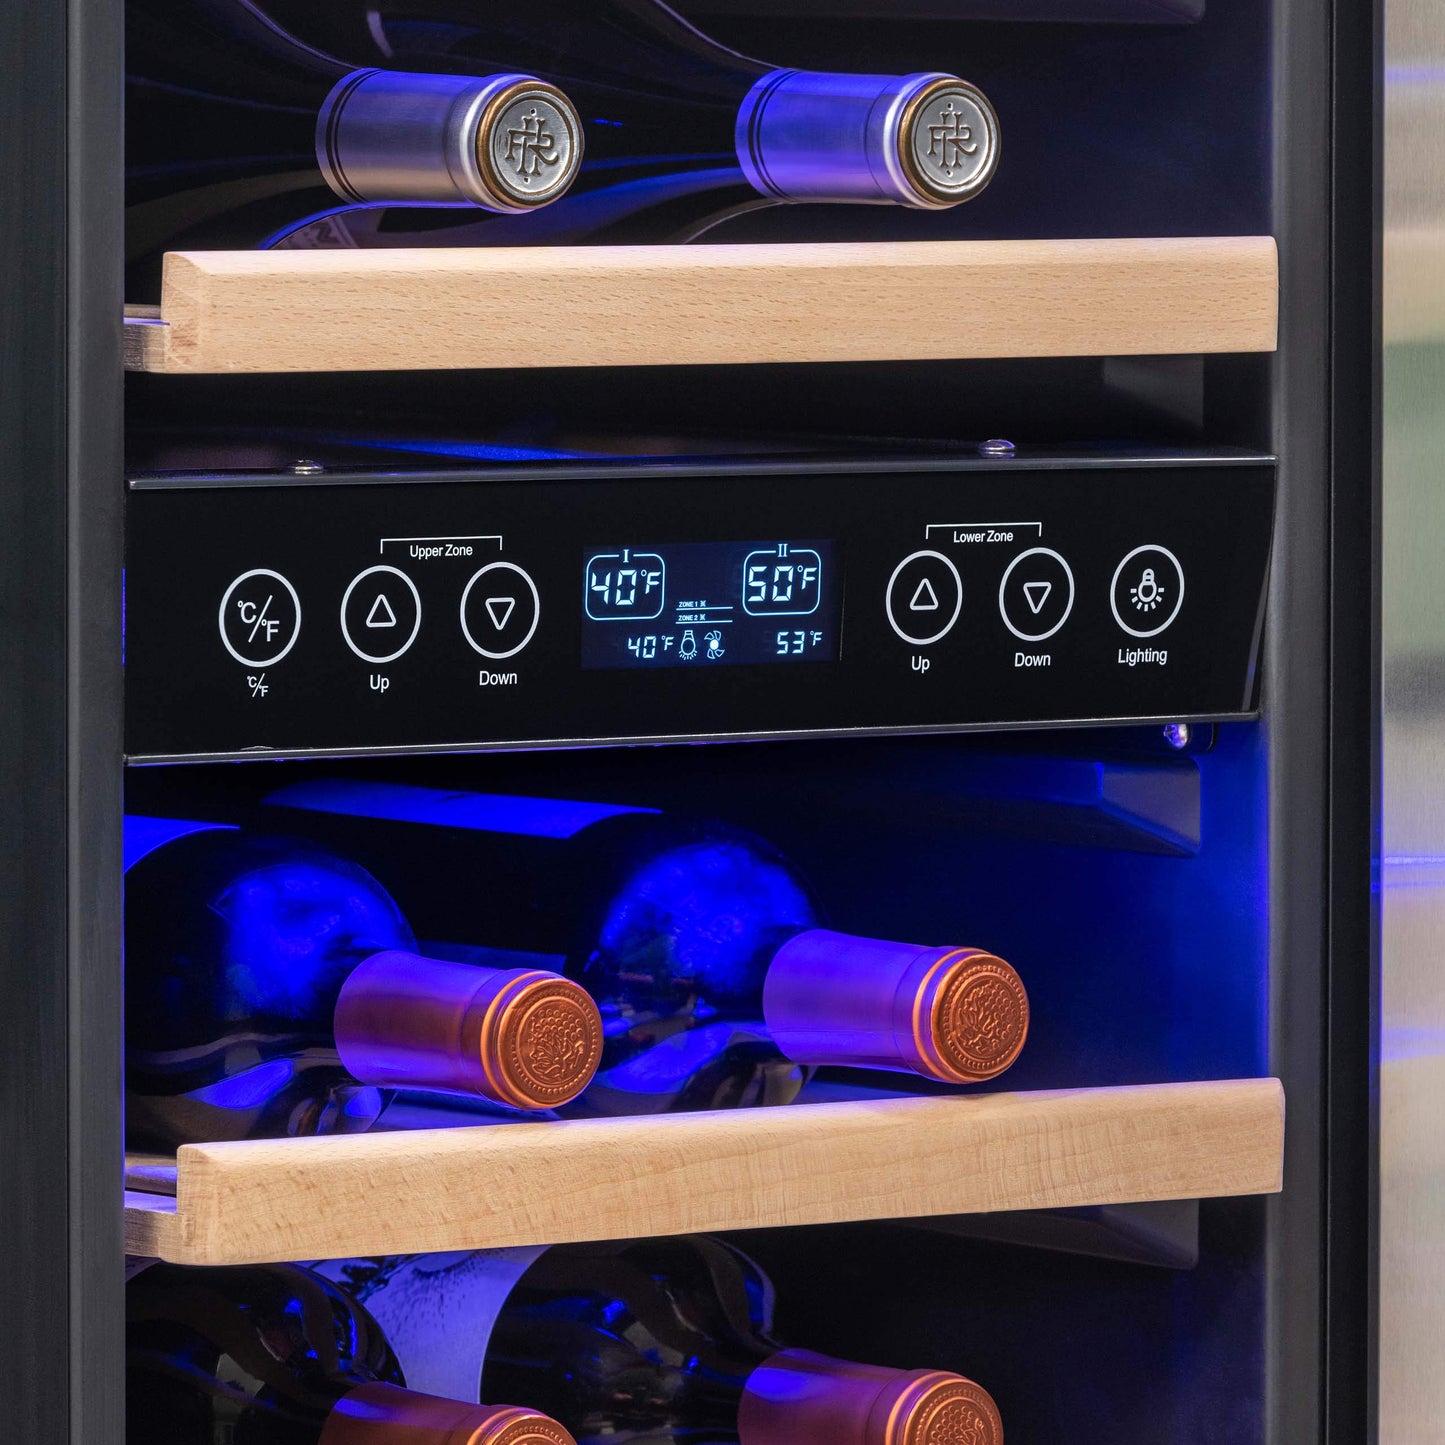 NewAir 15" Wine Cooler Refrigerator | 29 Bottle Capacity | Fridge Built-in Or Free Standing | Dual Zone Wine Fridge With Removable Beech Wood Shelves In Stainless Steel NWC029SS01